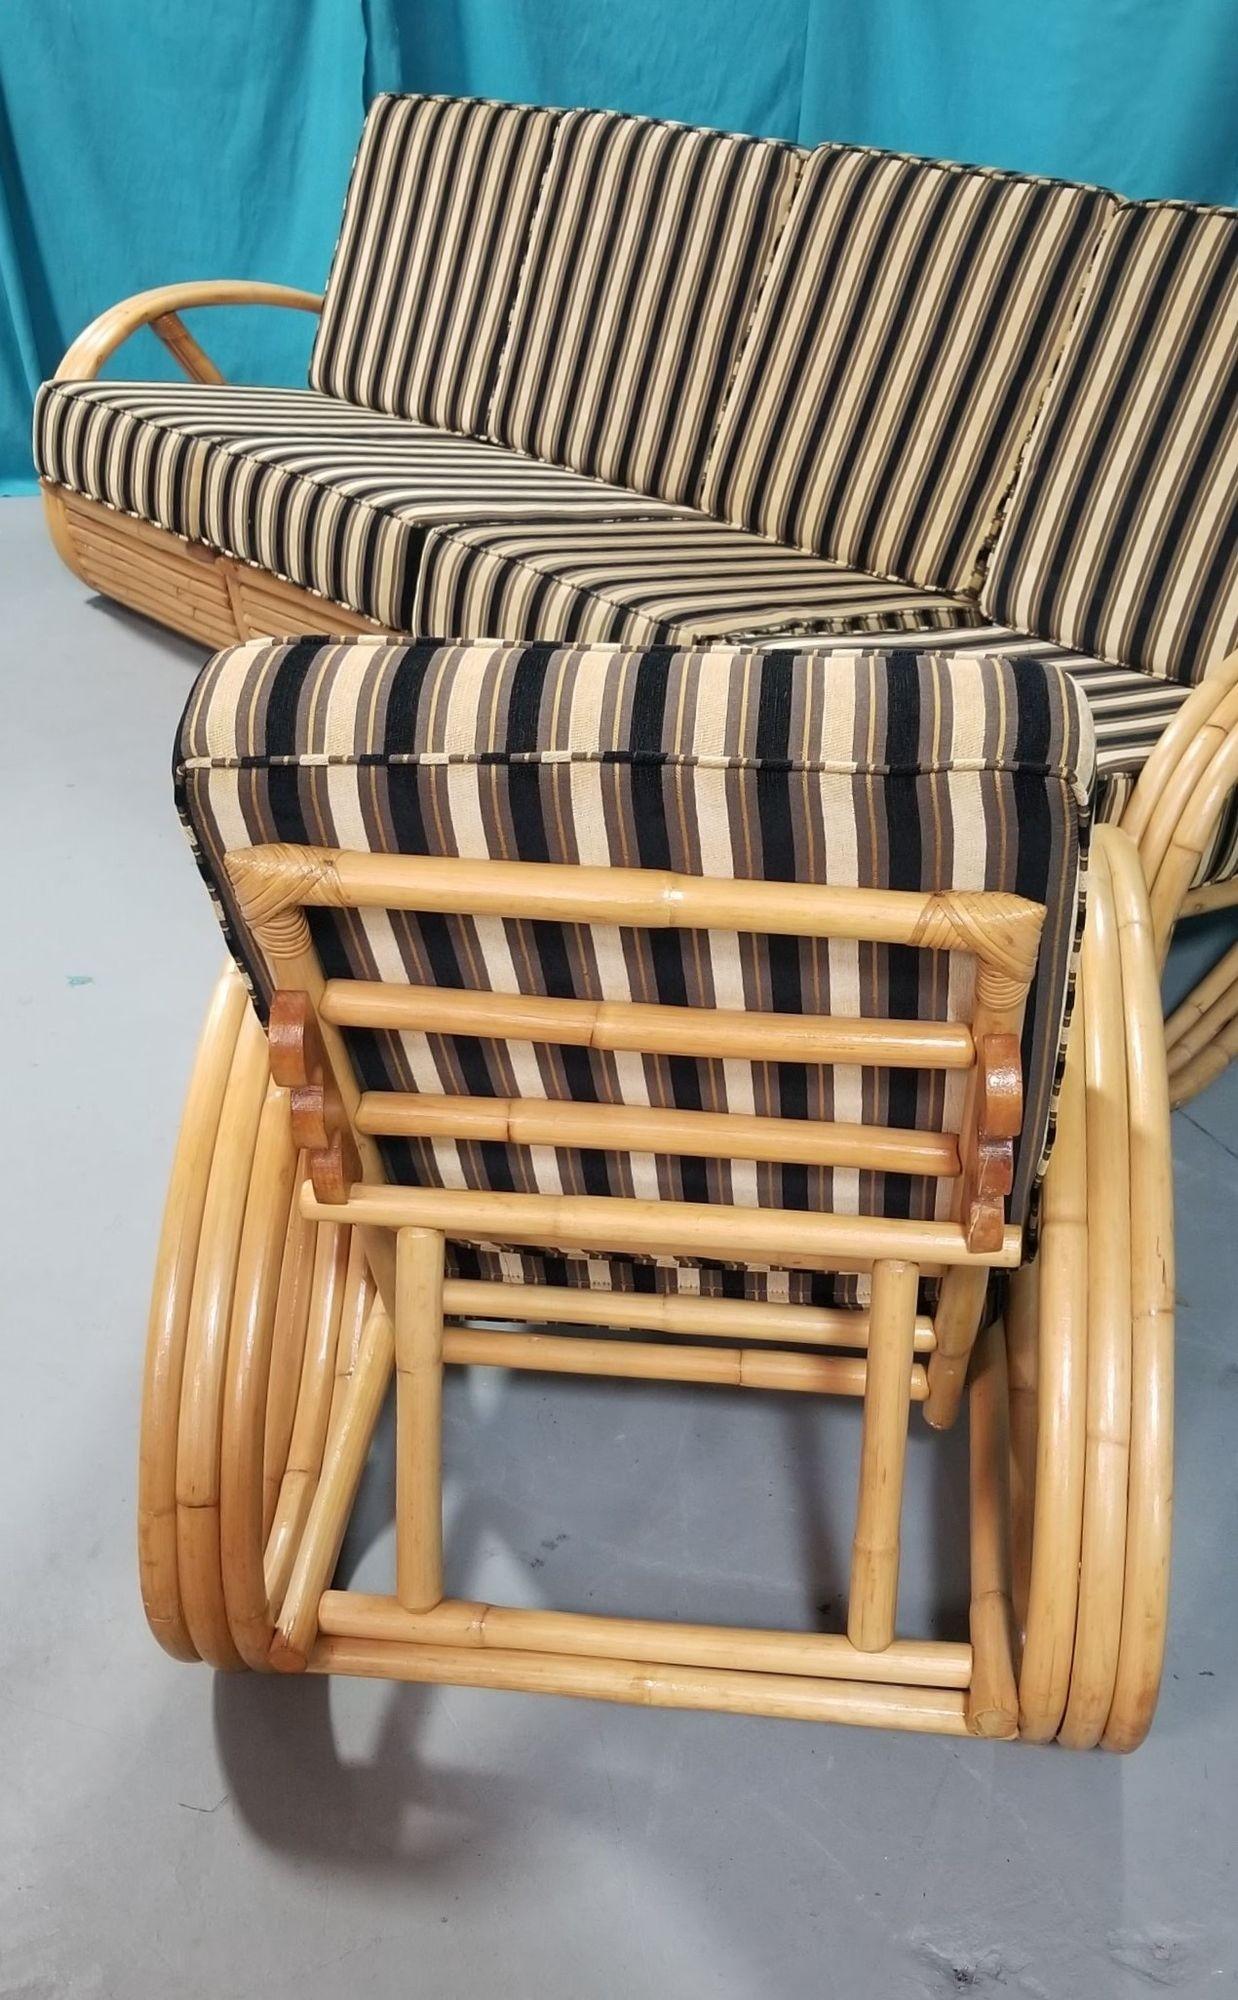 Restored Rattan 3/4 Pretzel Sofa & Lounge Chair Living Room Set In Excellent Condition For Sale In Van Nuys, CA